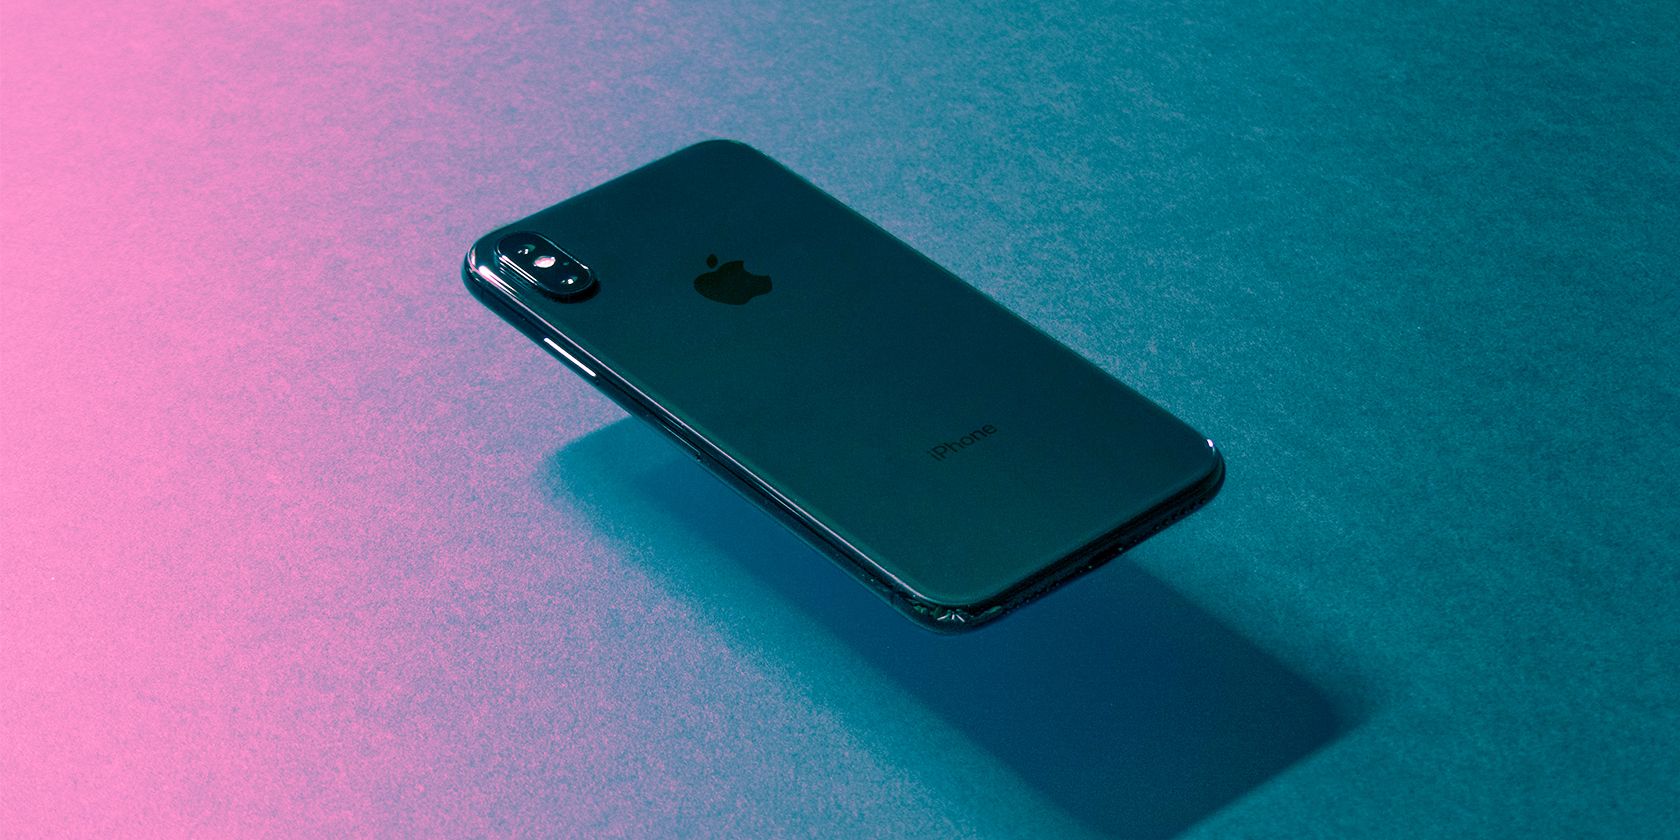 iPhone X floating on a dark background